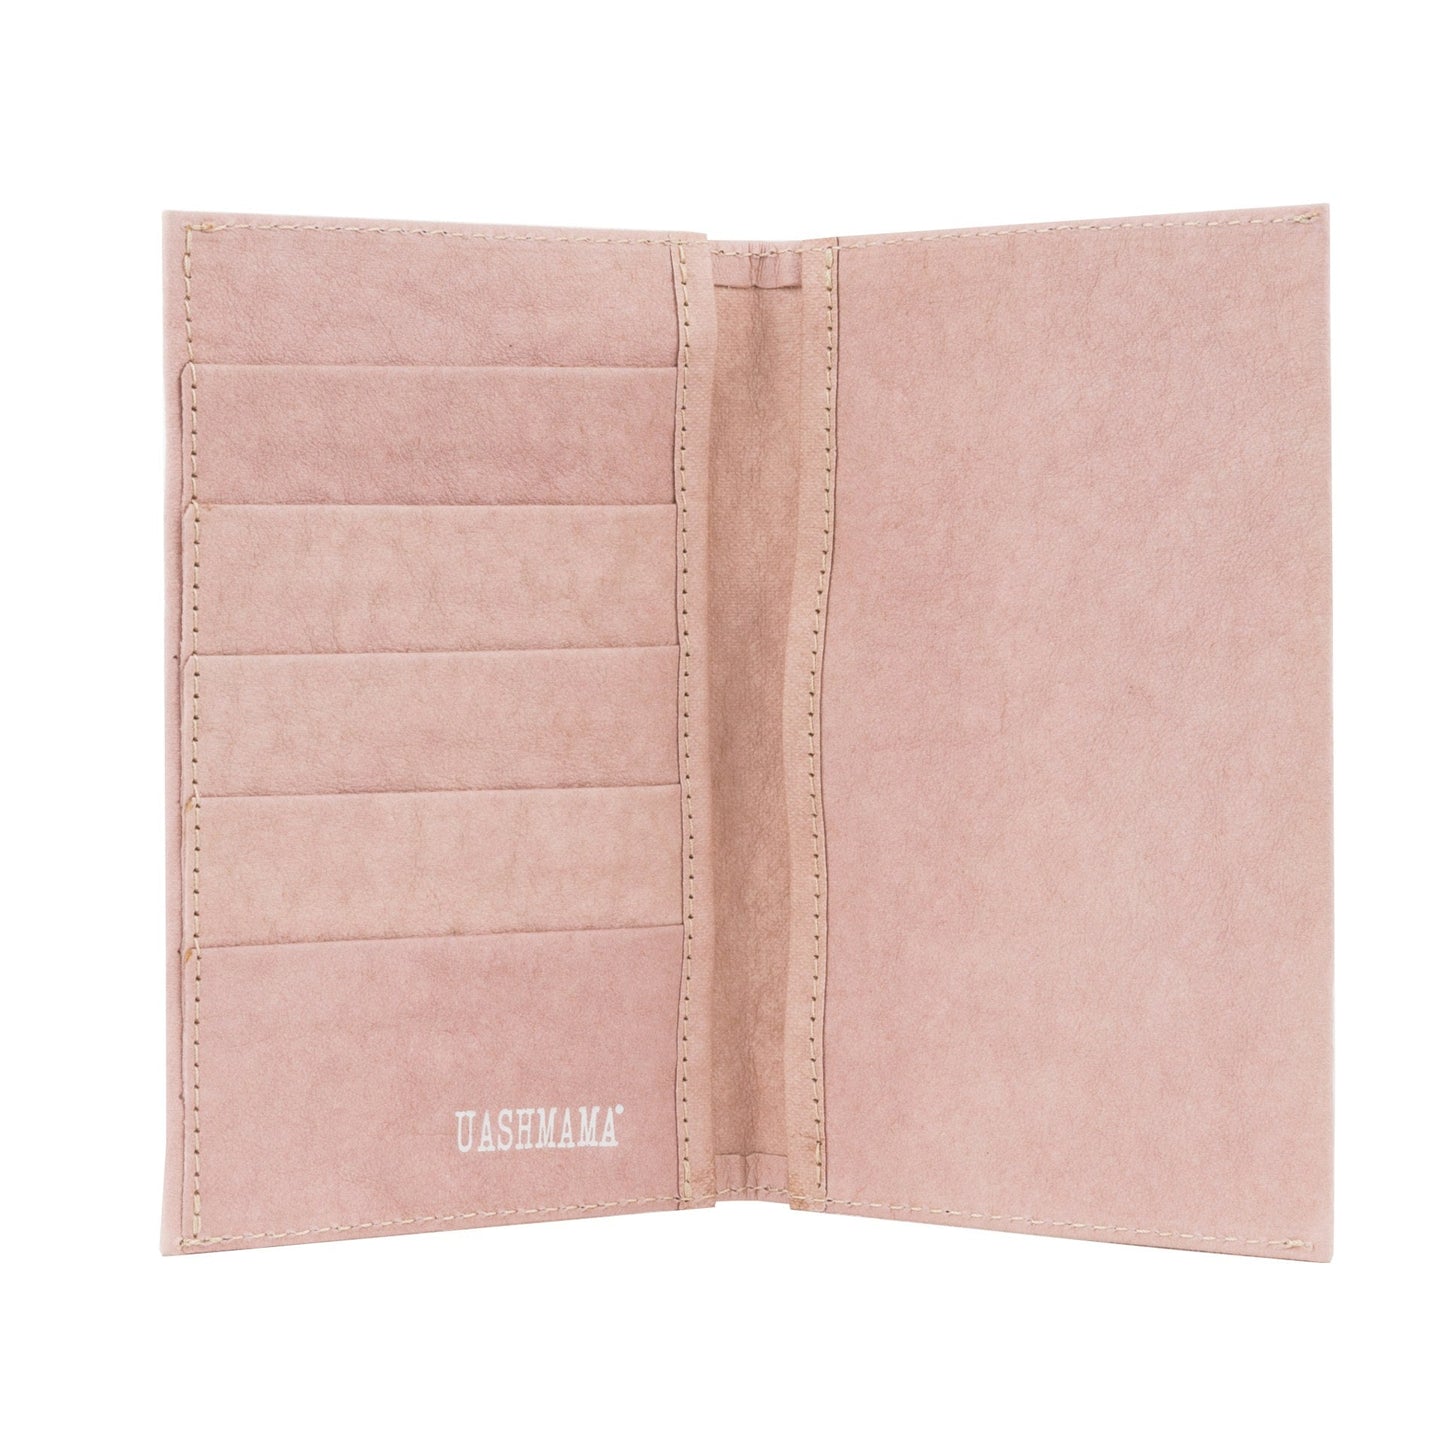 A washable paper large wallet is shown open. On the left hand side are 5 credit card slots. On the right hand side is one large pocket. The UASHMAMA logo is shown on the bottom left of the wallet. The colour of the wallet is pale pink.